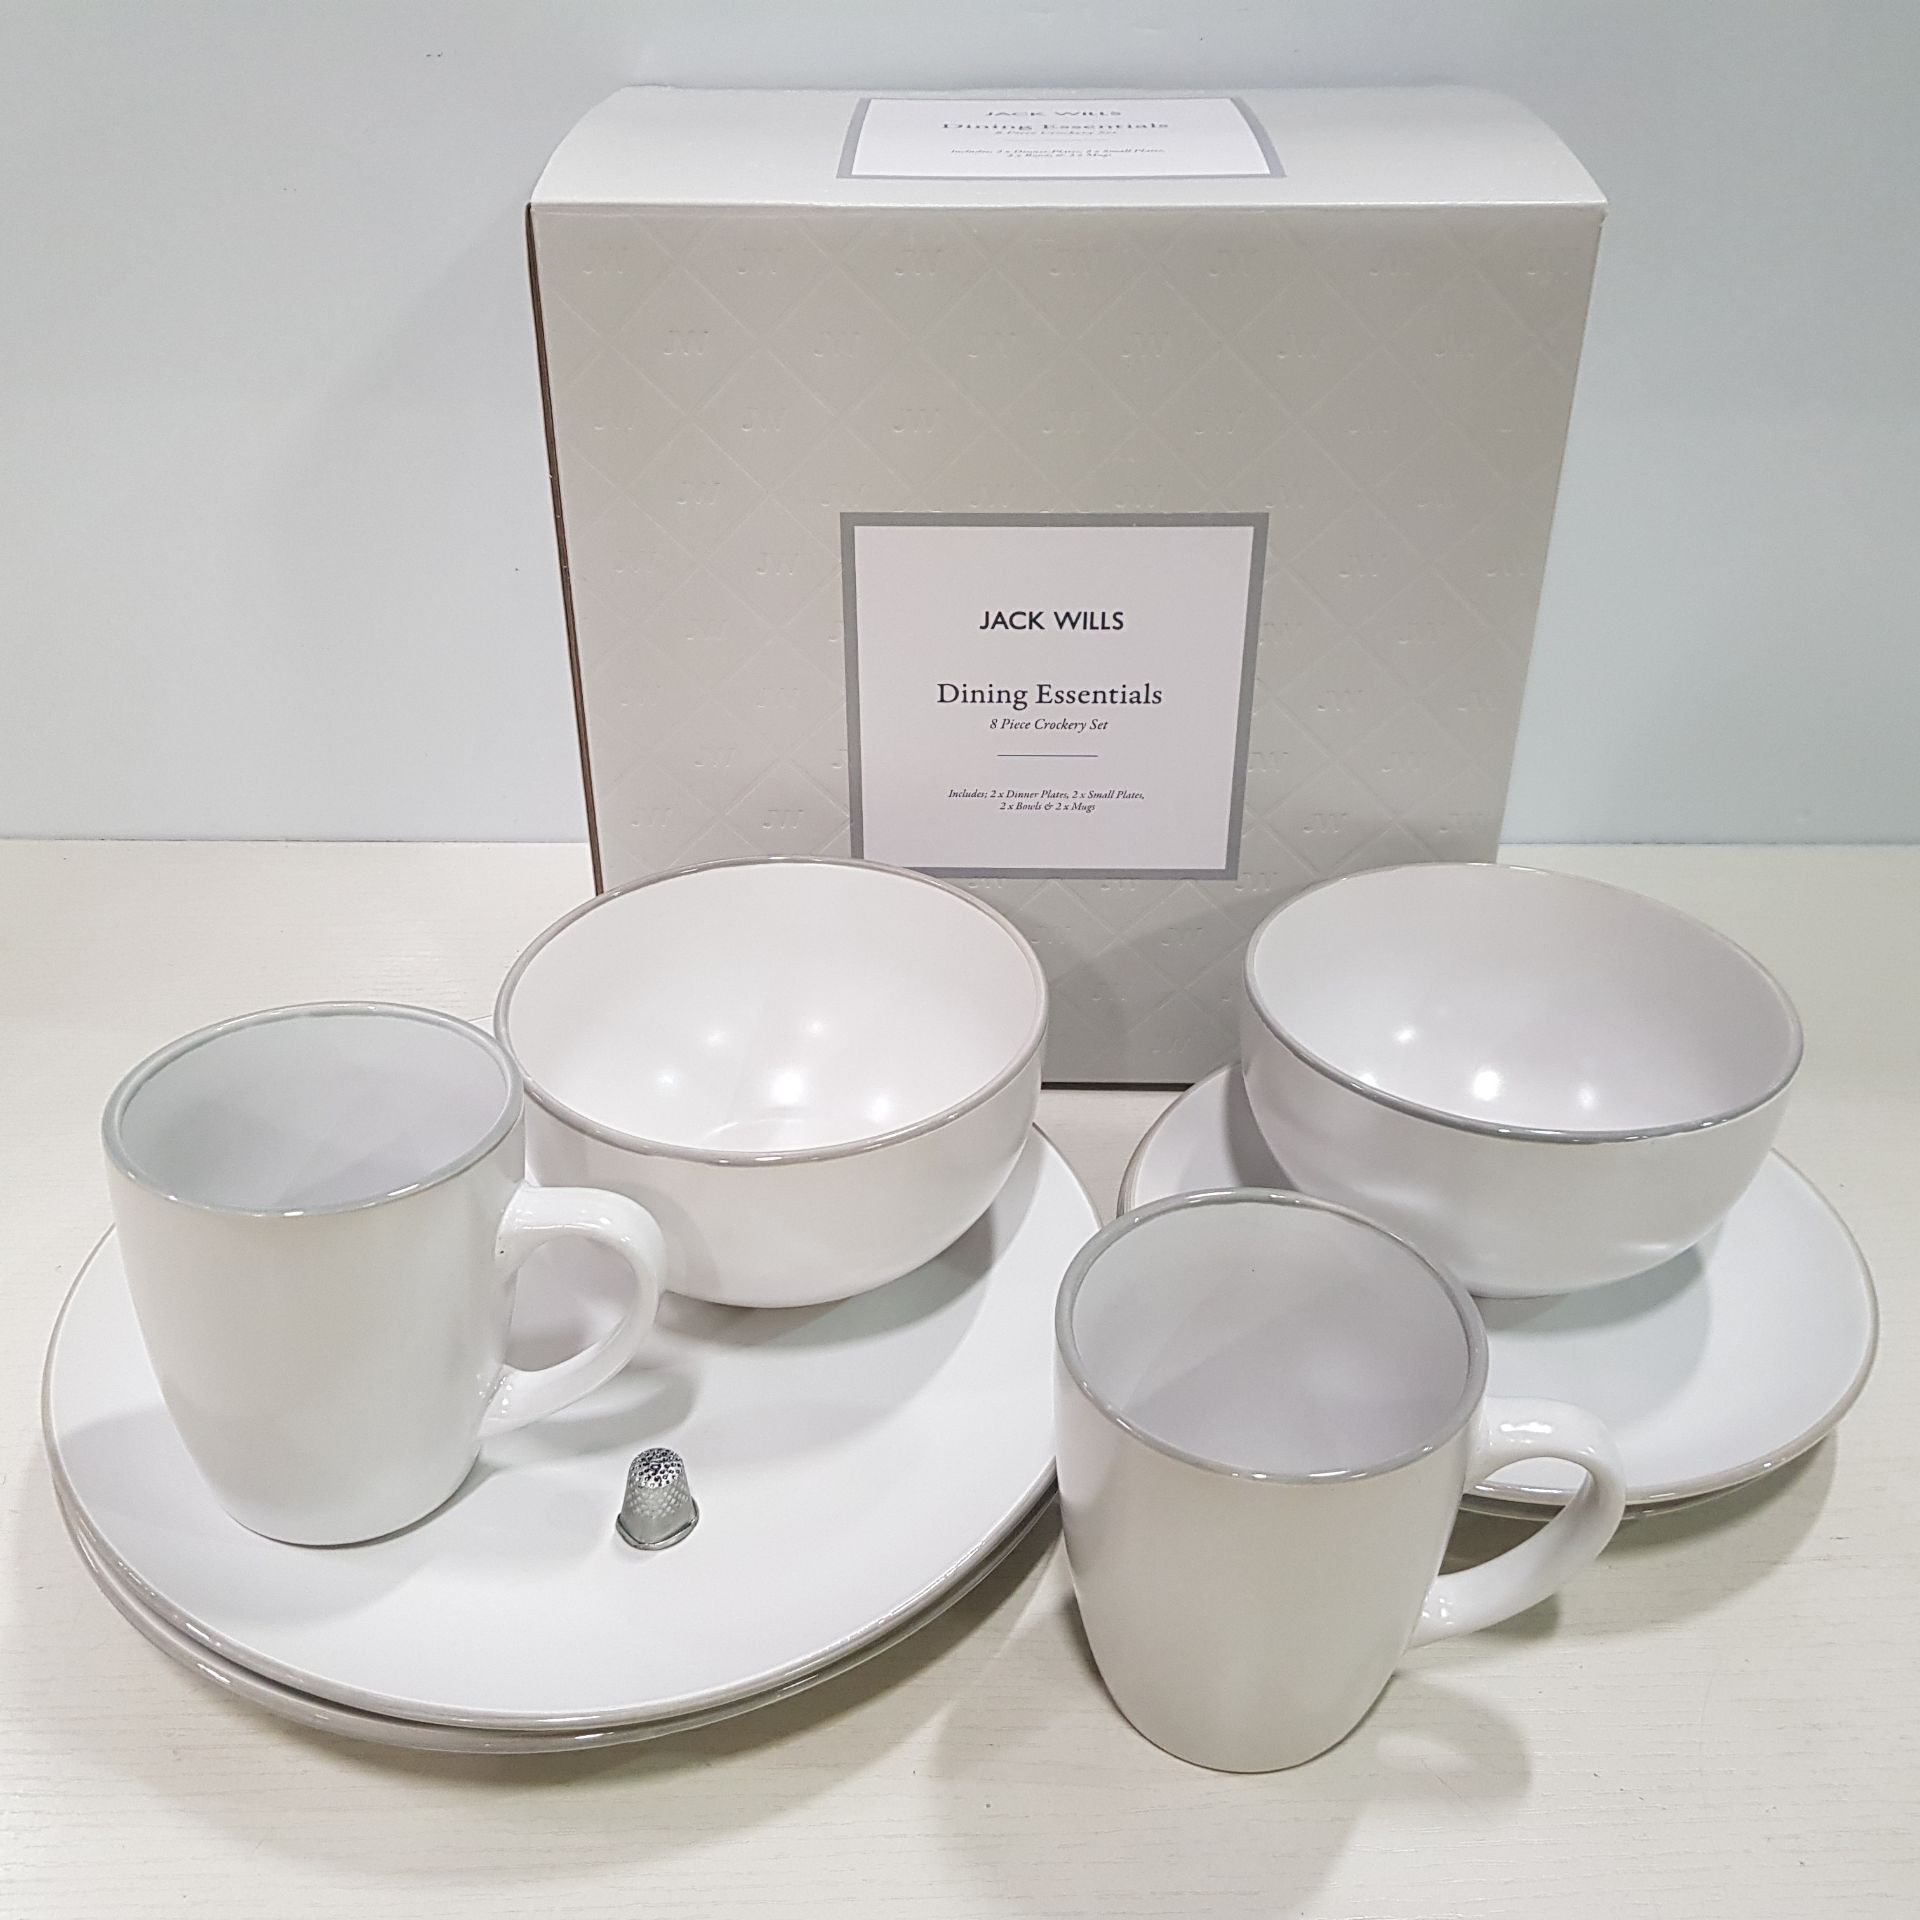 10 X BRAND NEW JACK WILLS BOXED DINING ESSENTIALS 8 PIECE CROCKERY SET TO INCLUDE 2 X DINNER